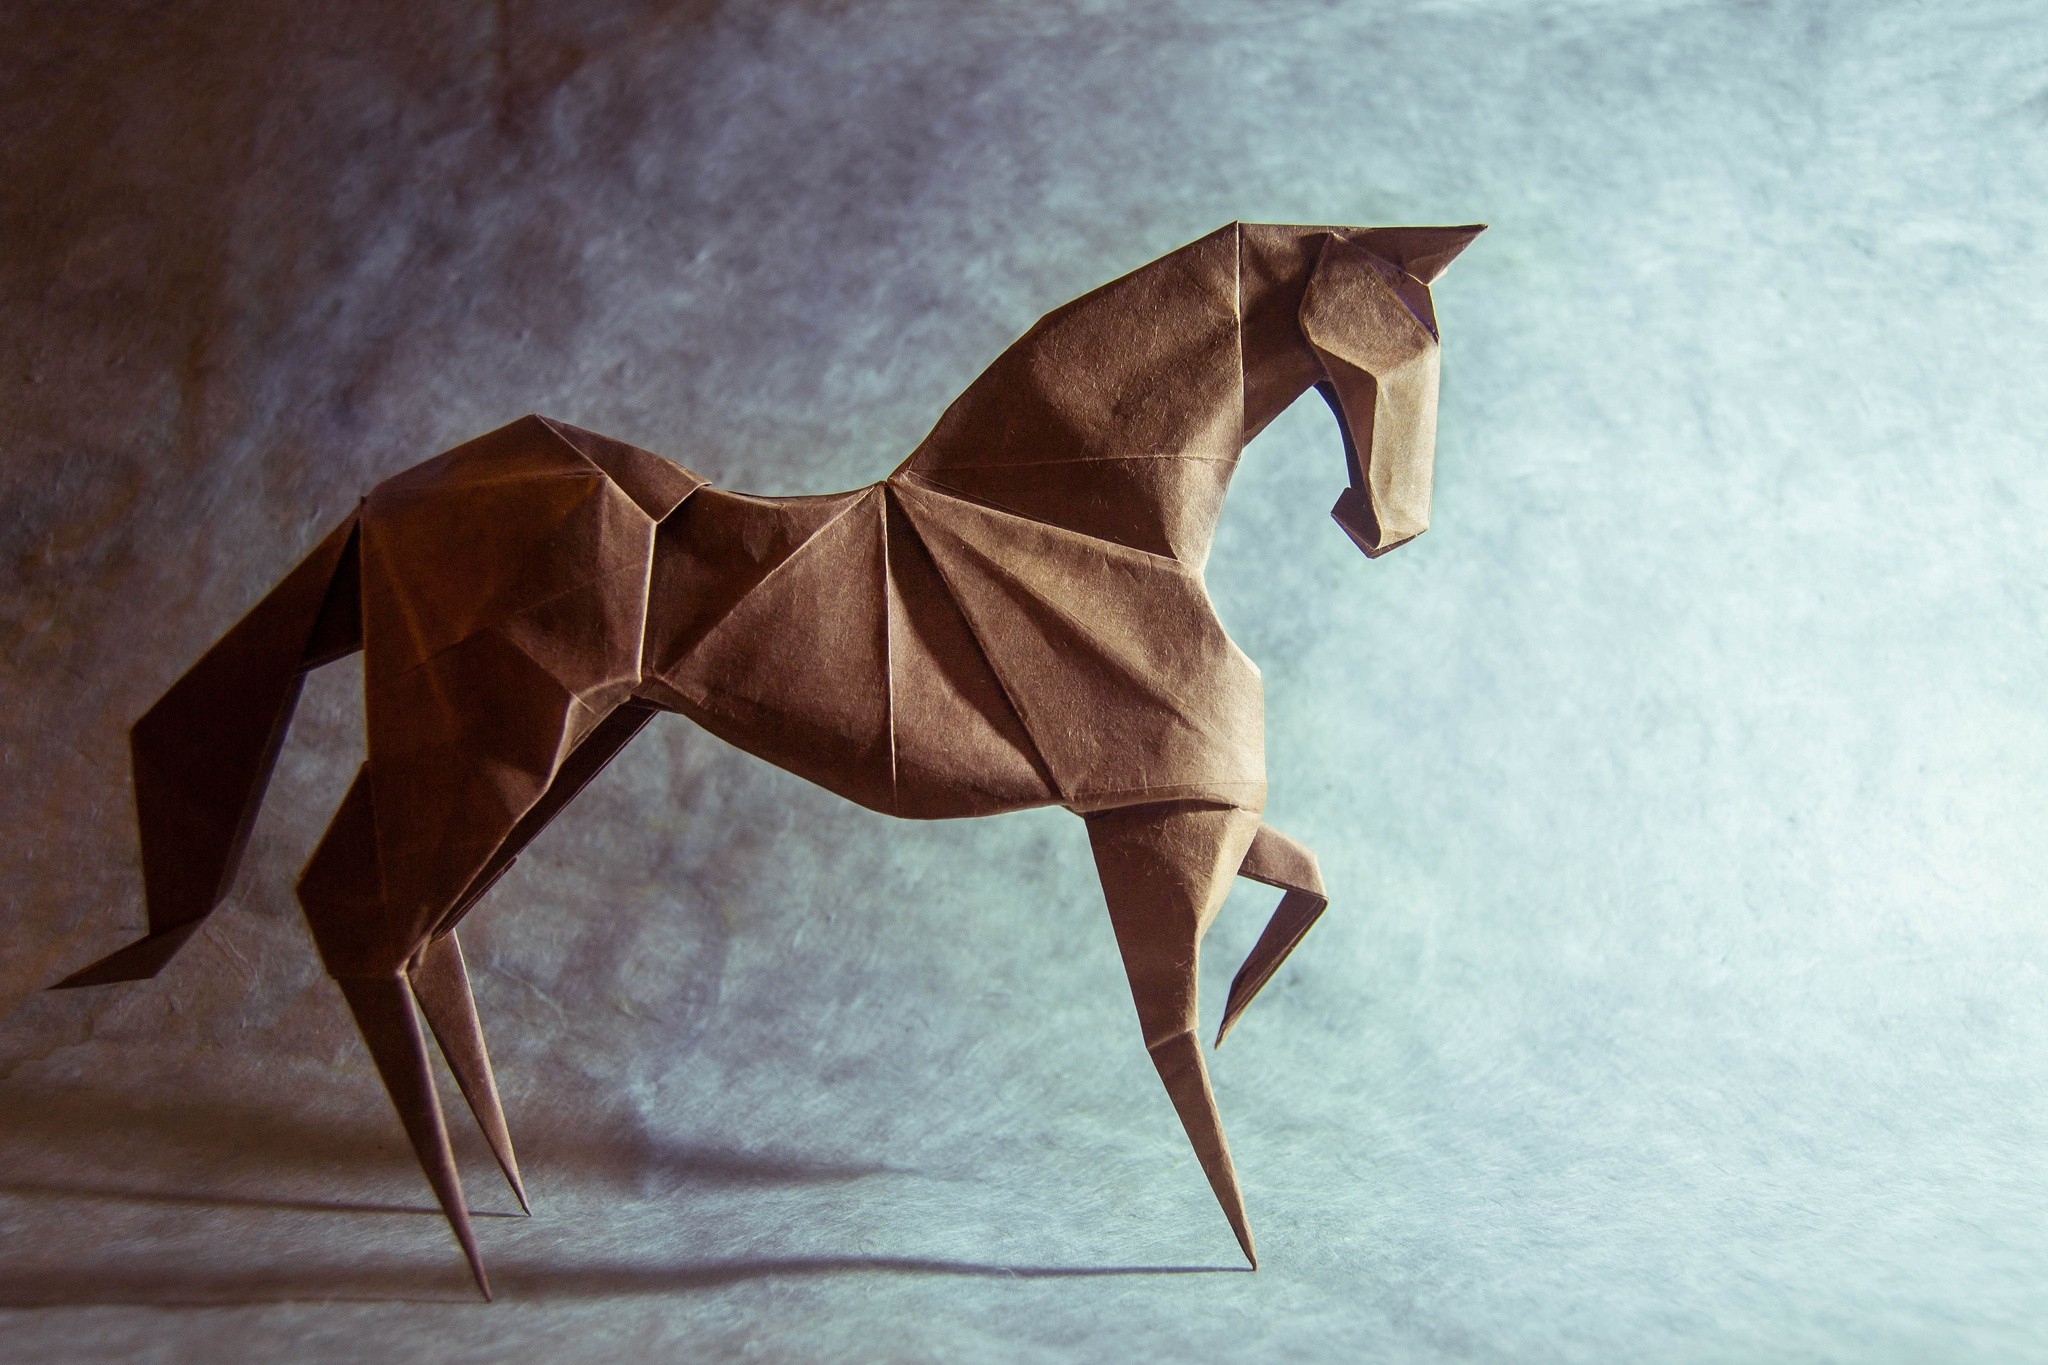 General 2048x1365 animals paper origami horse simple background